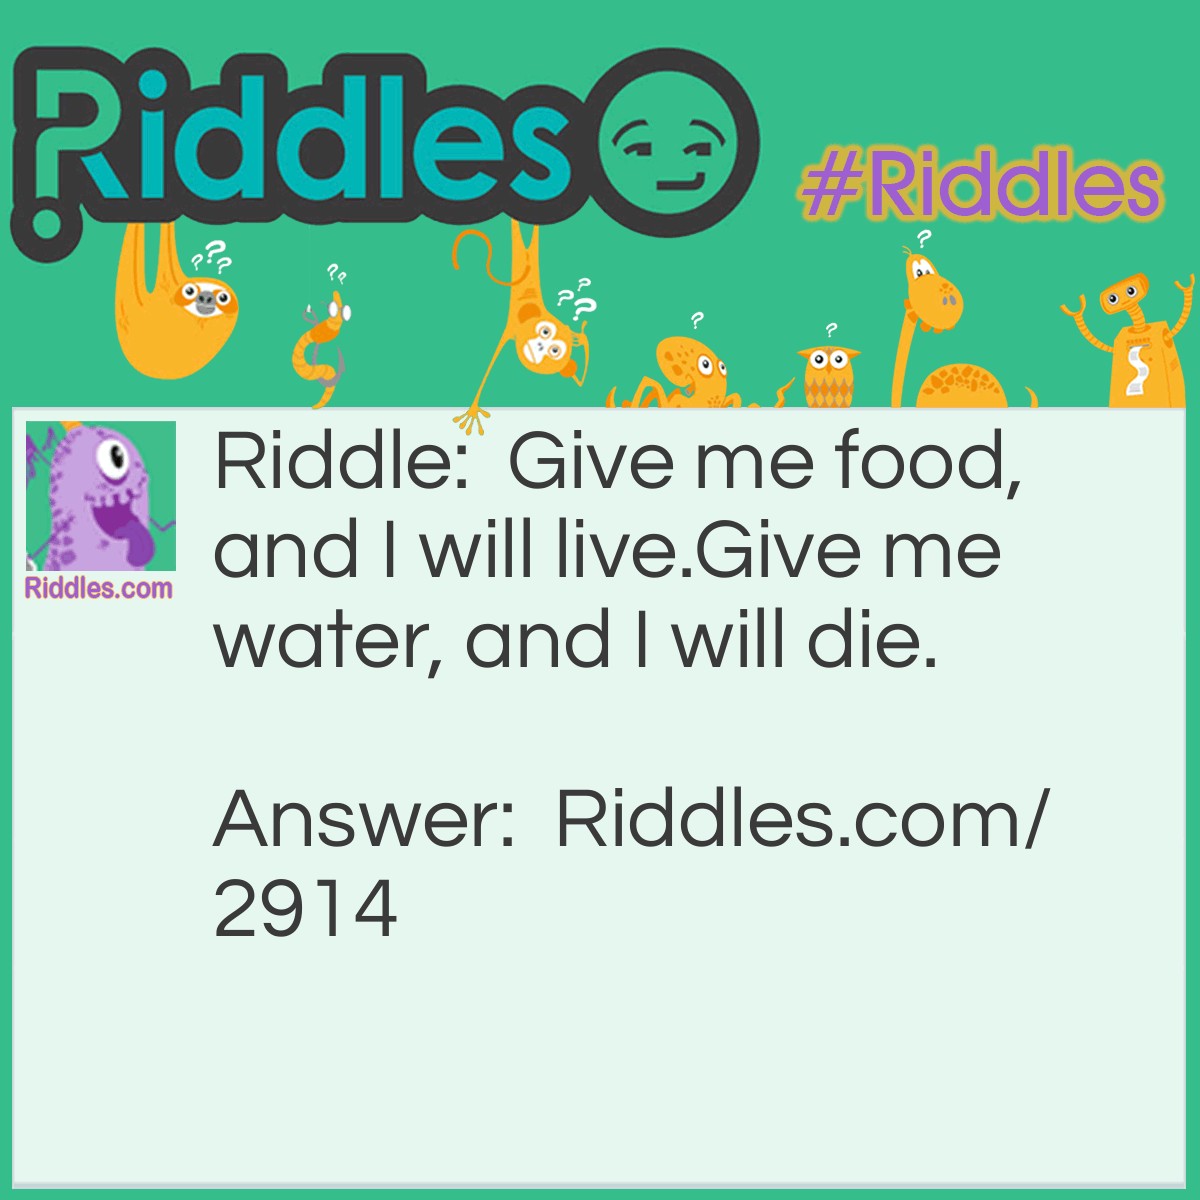 Riddle: Give me food, and I will live. Give me water, and I will die. What am I? Answer: Fire.